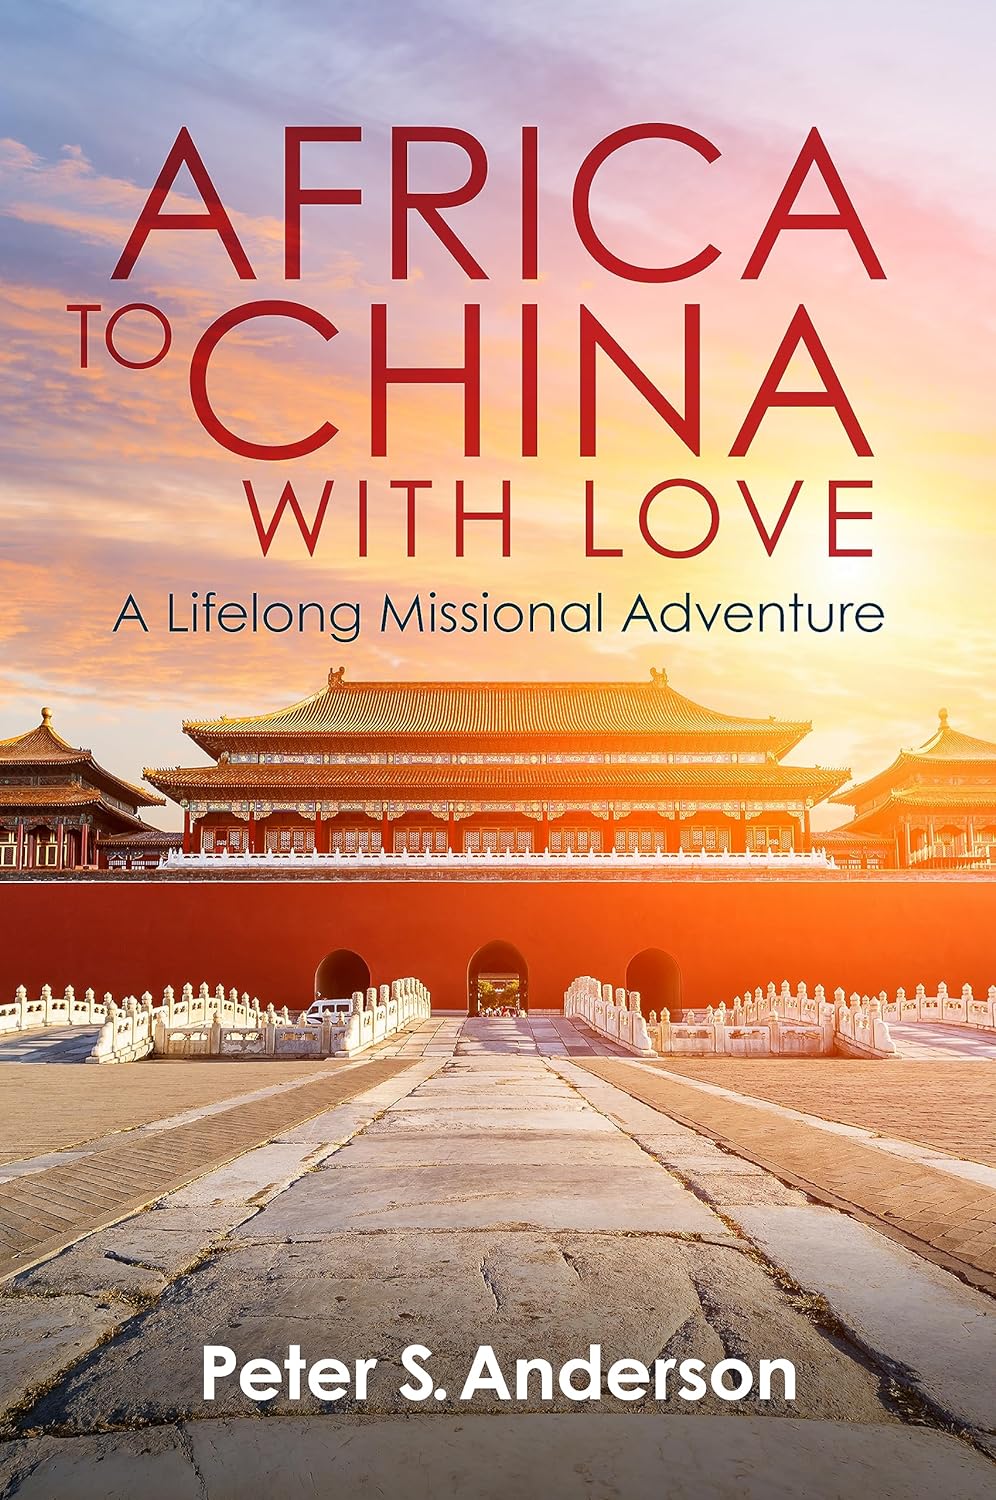 Africa to China with Love: A Lifelong Missional Adventure